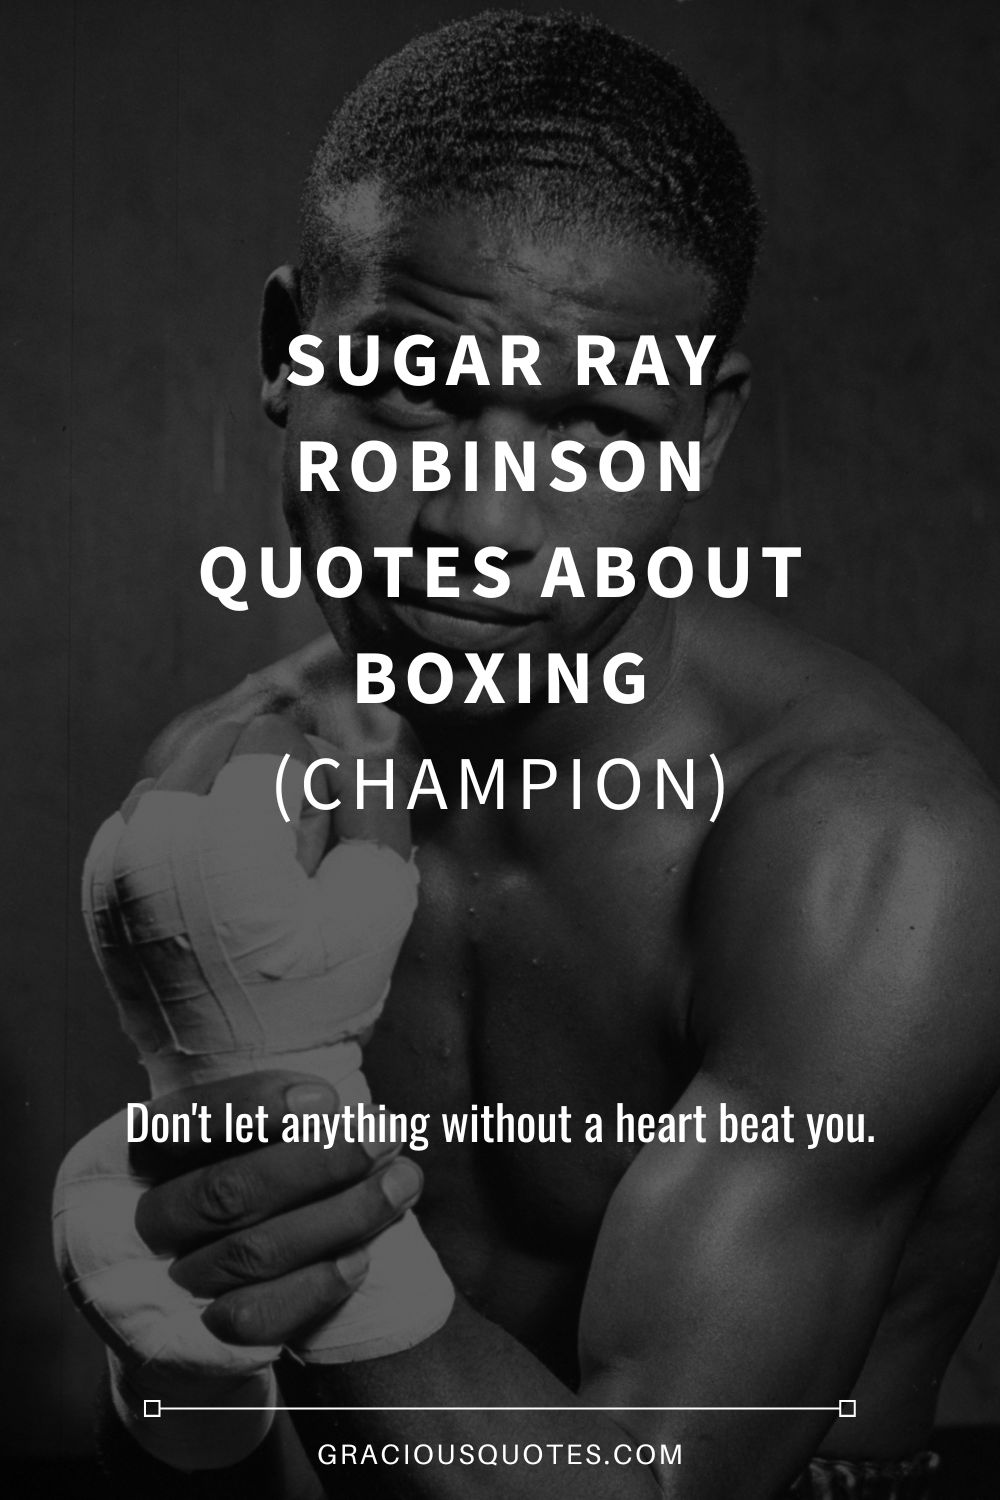 Sugar Ray Robinson Quotes About Boxing (CHAMPION) - Gracious Quotes